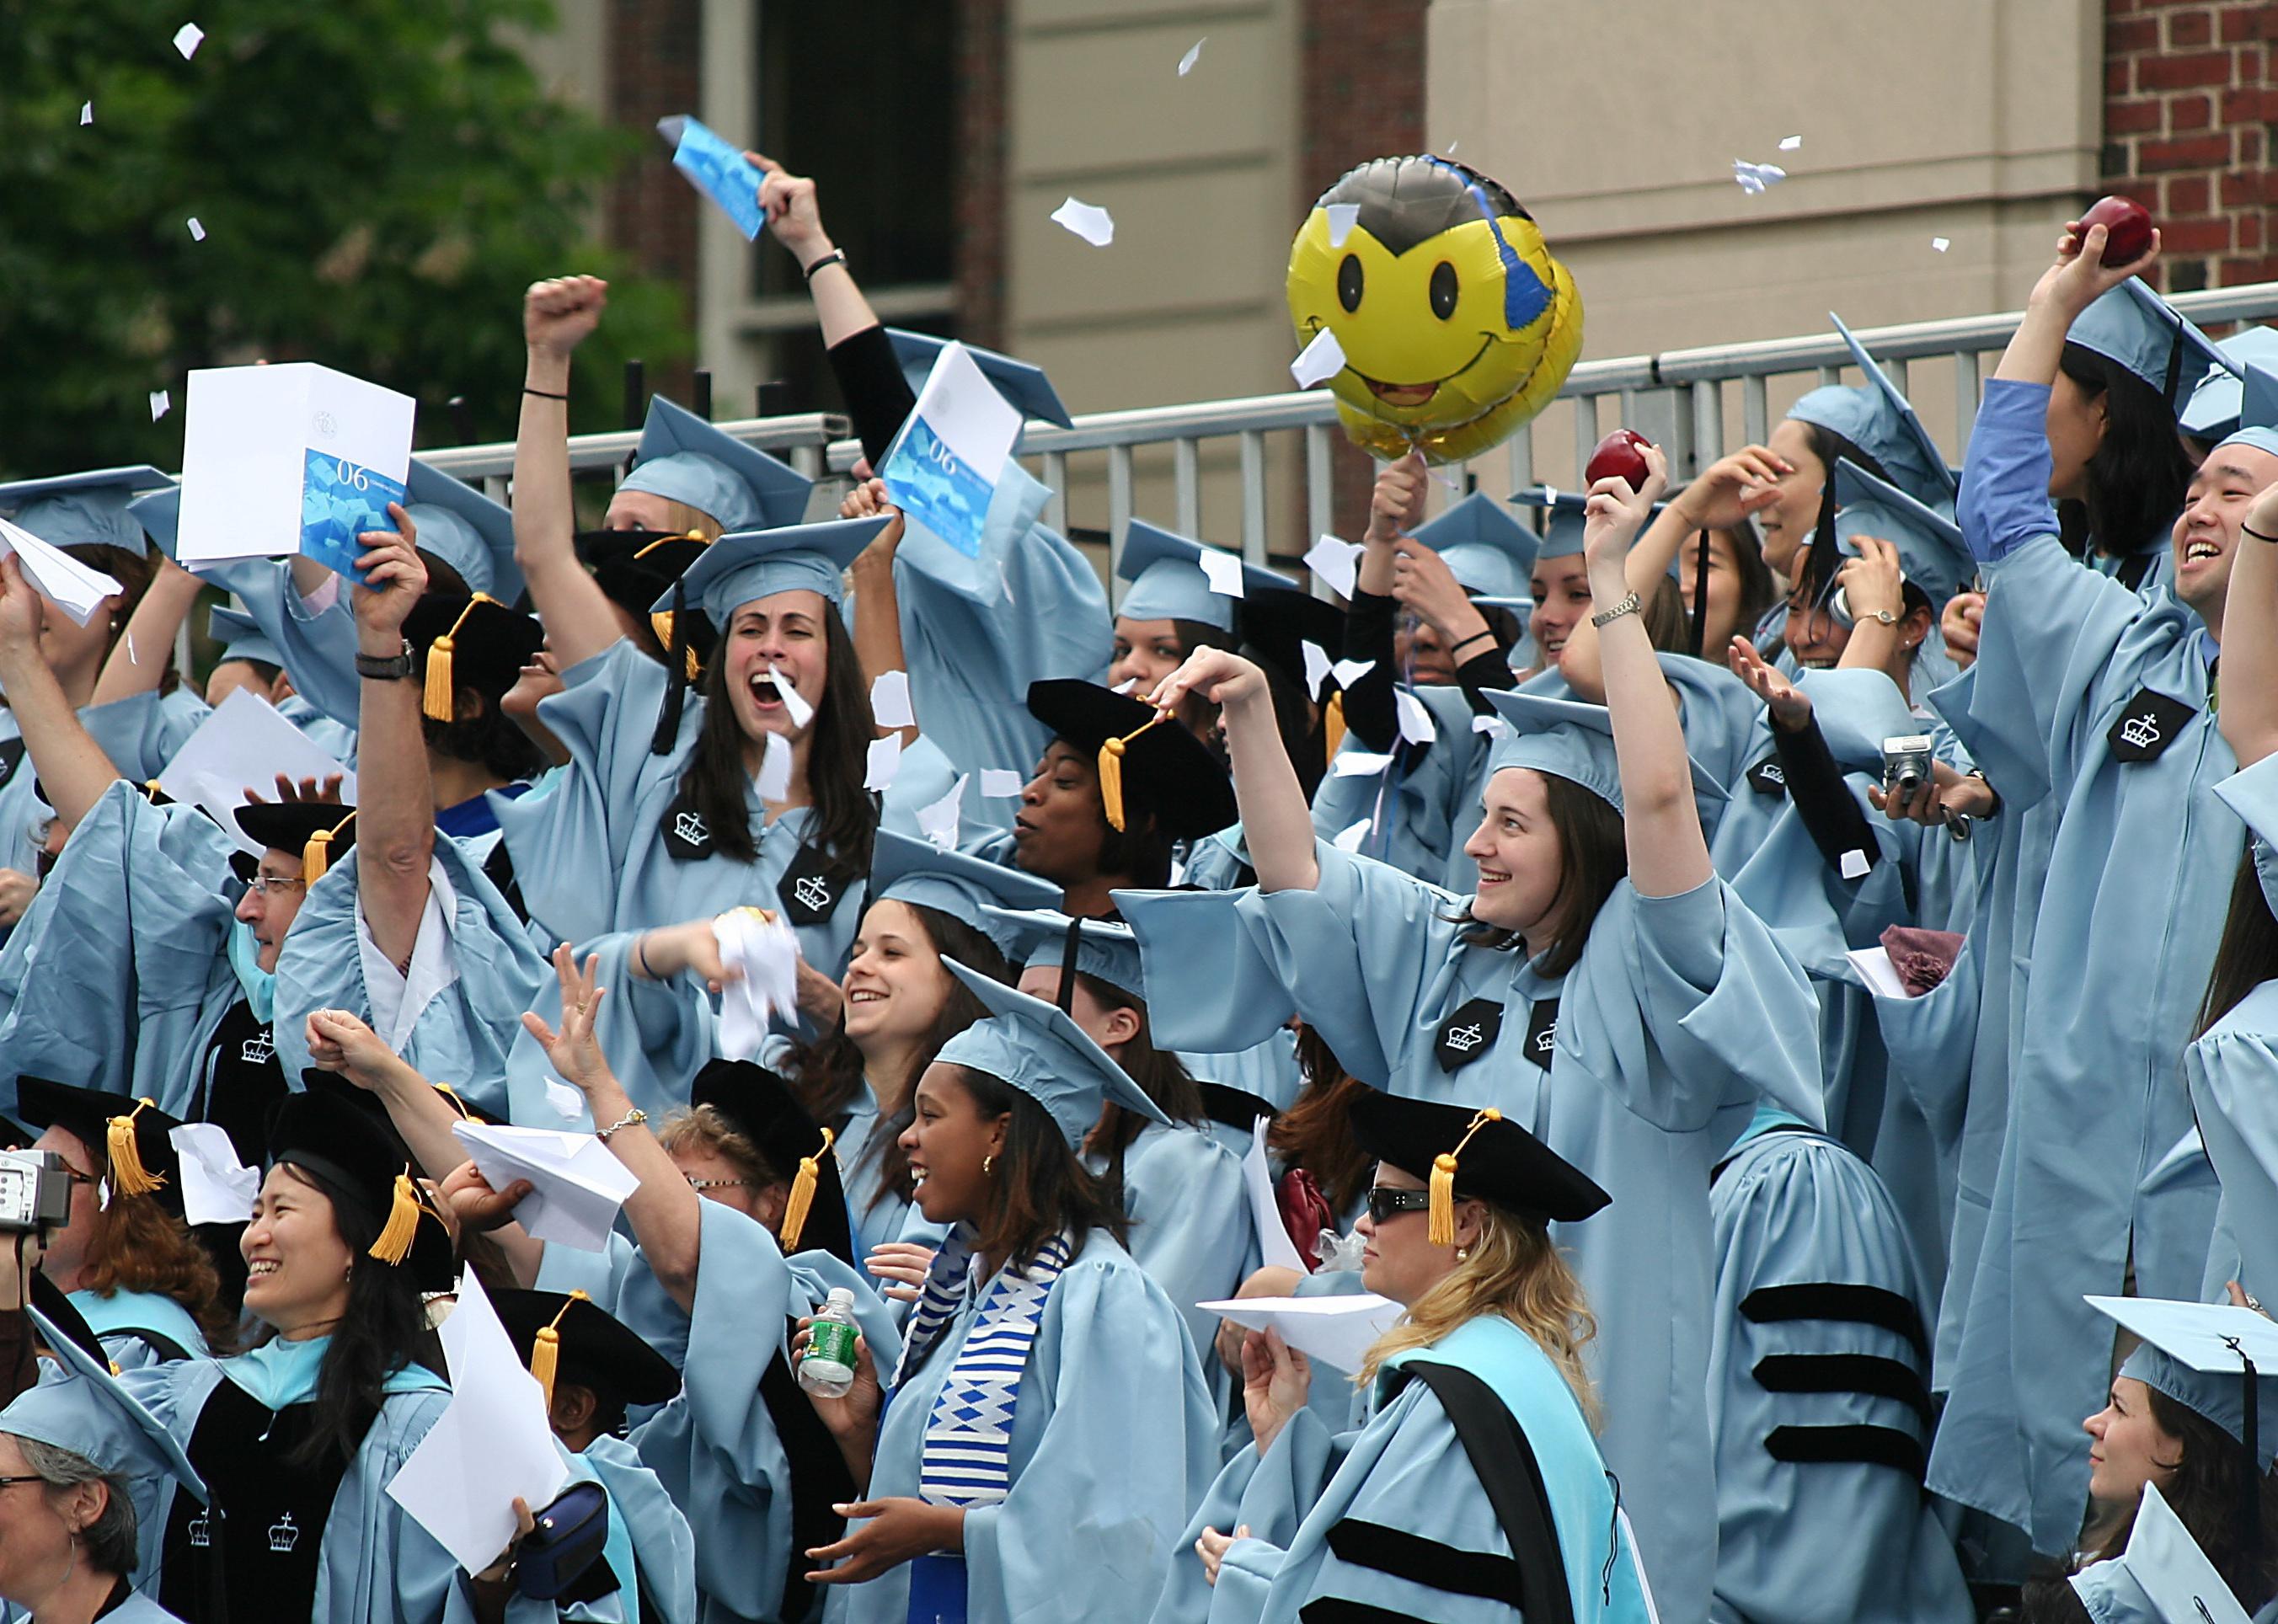 Graduate students in light blue caps and gowns cheering.